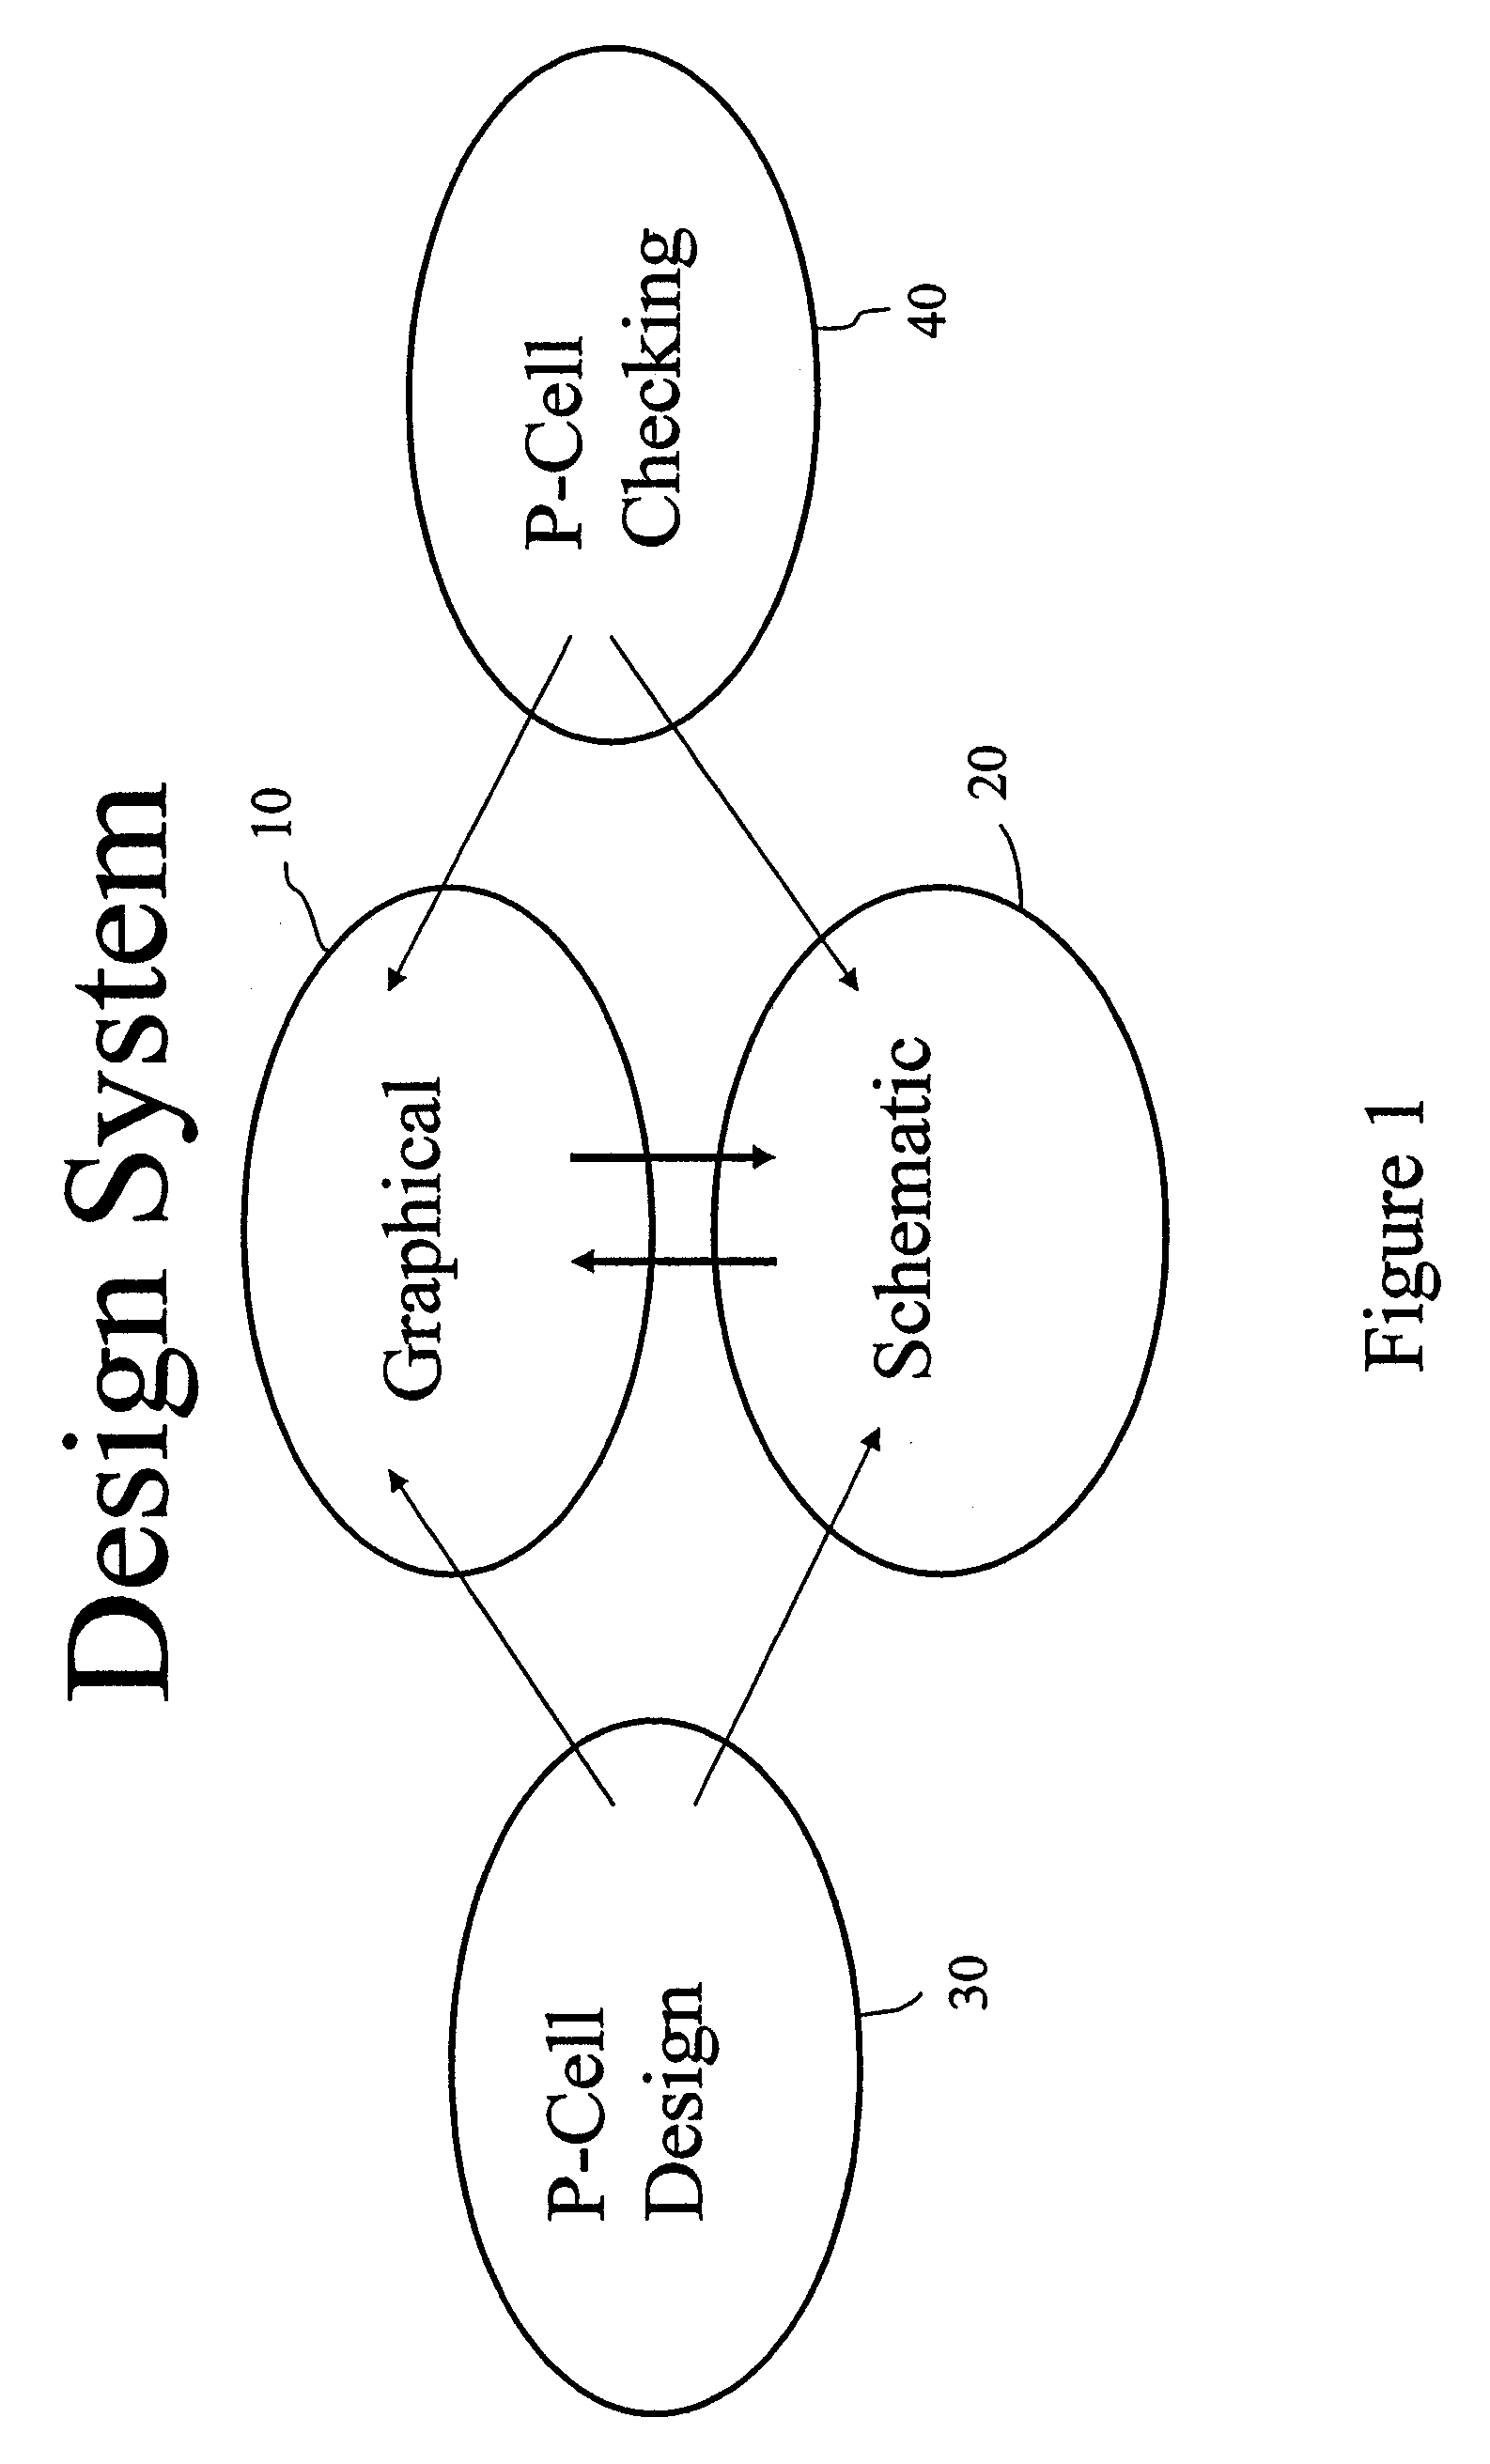 ESD design, verification and checking system and method of use